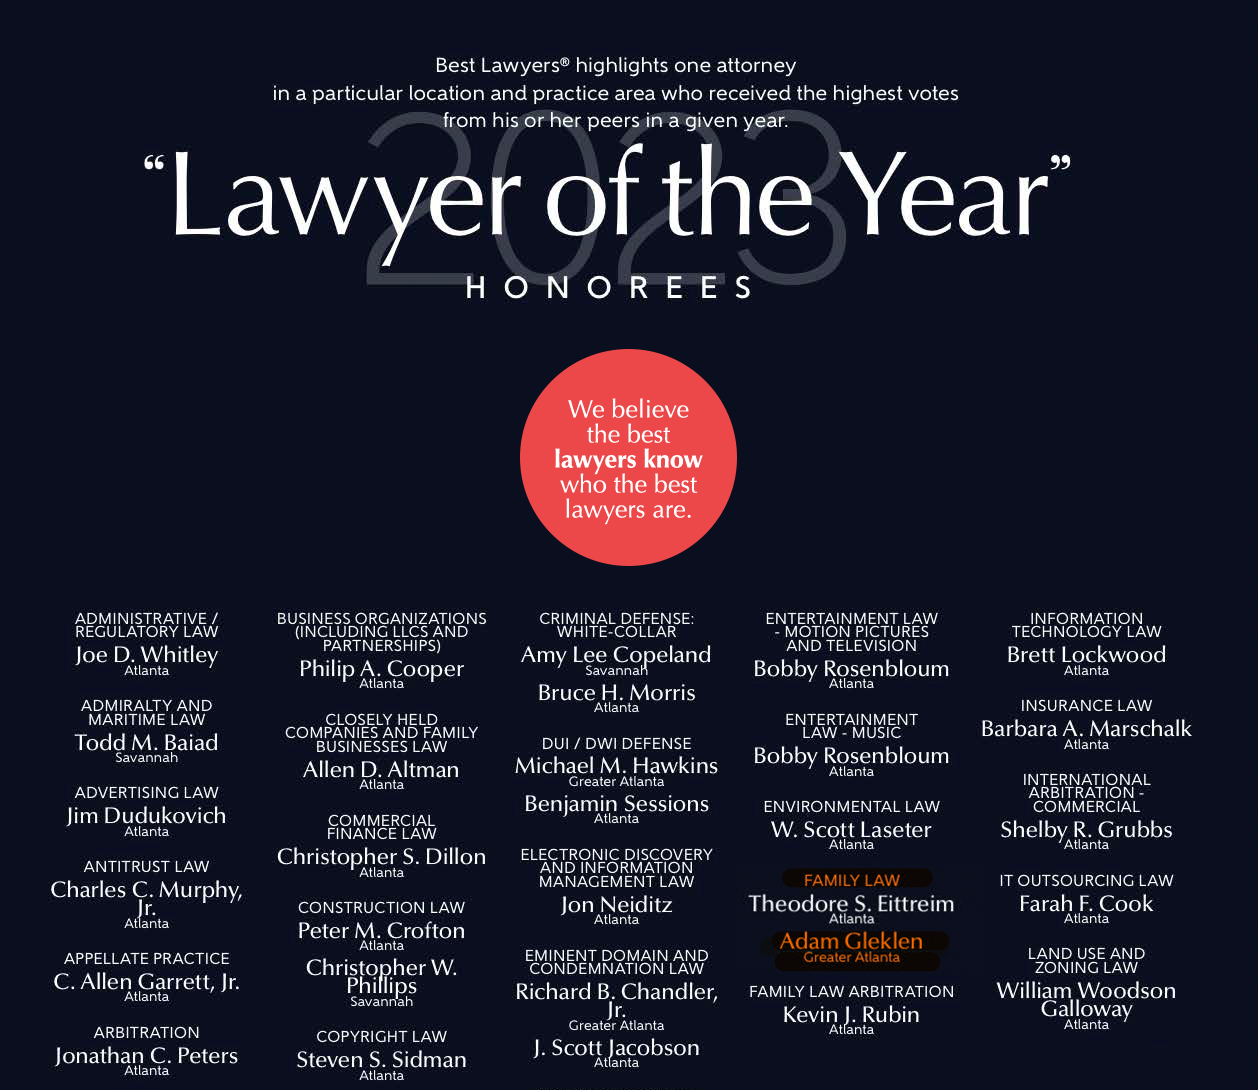 Lawyer of the Year Honorees